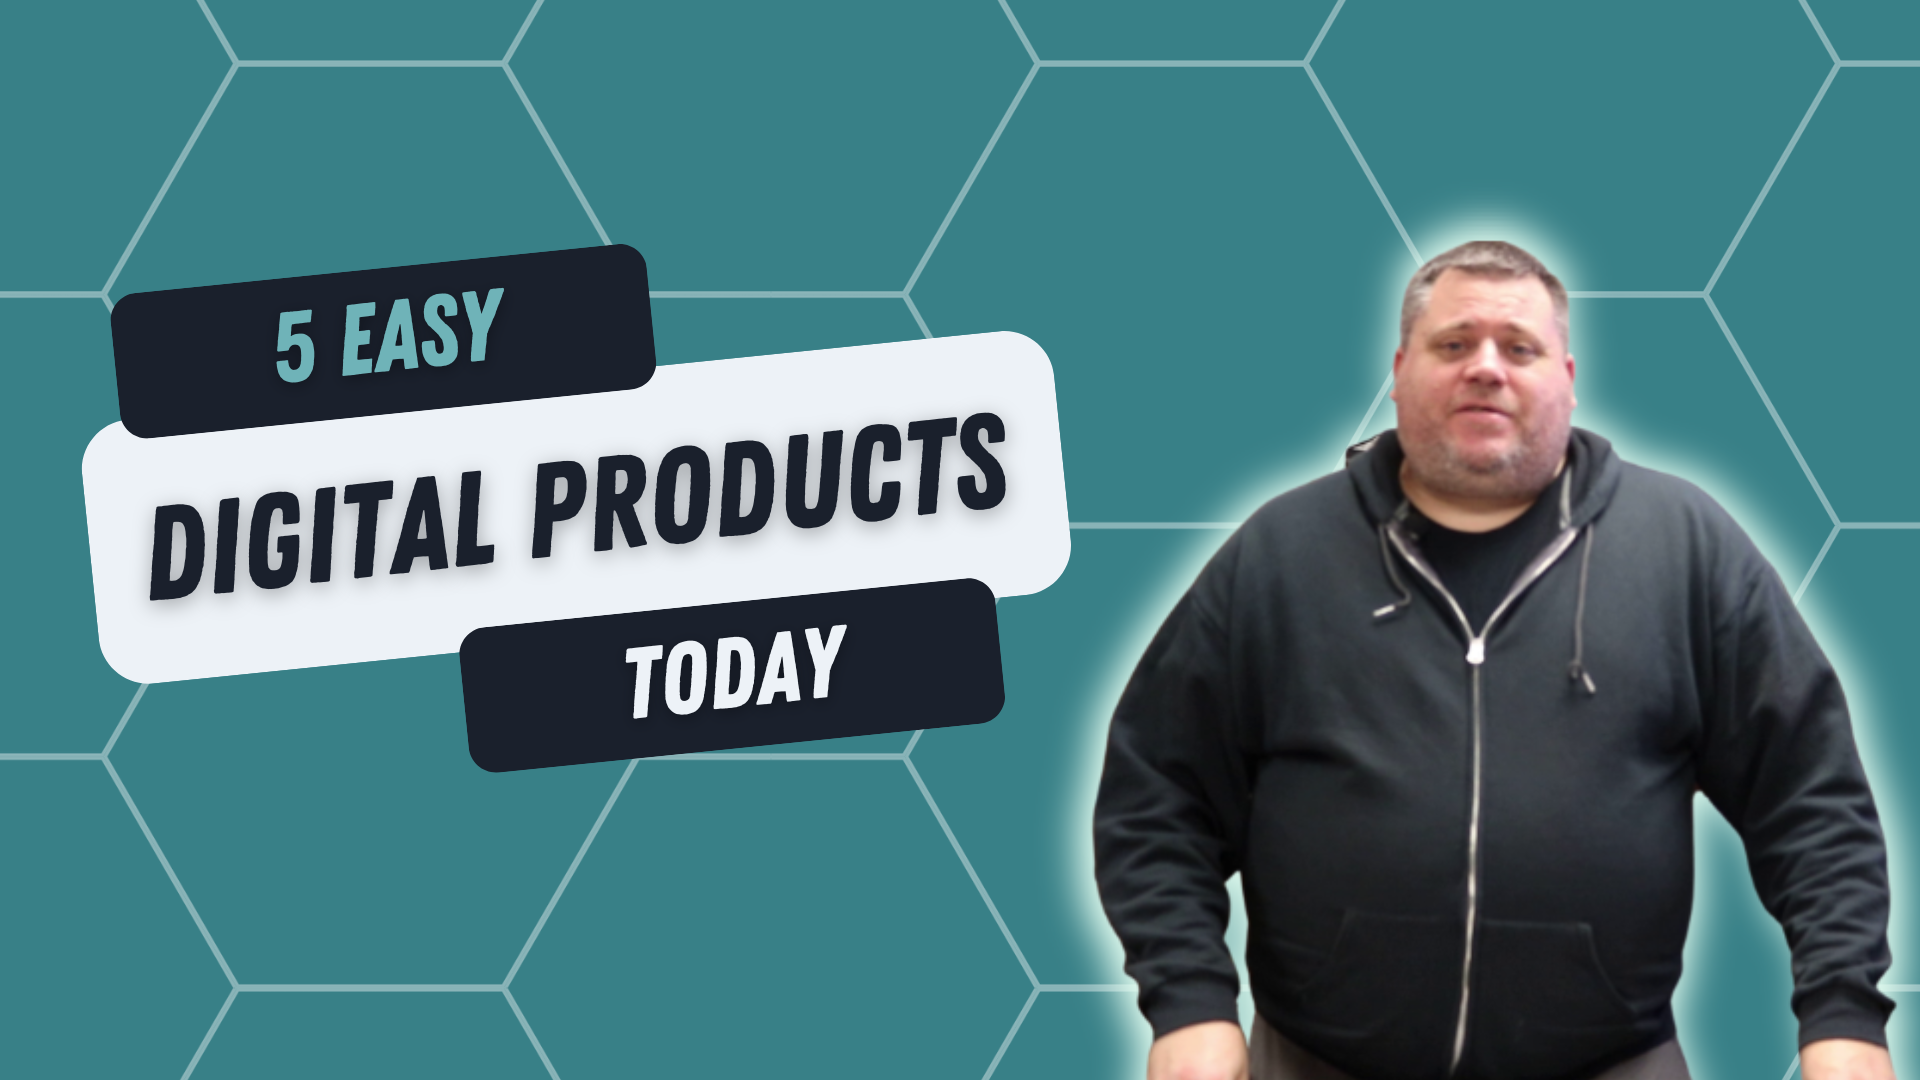 5 easy digital products create today